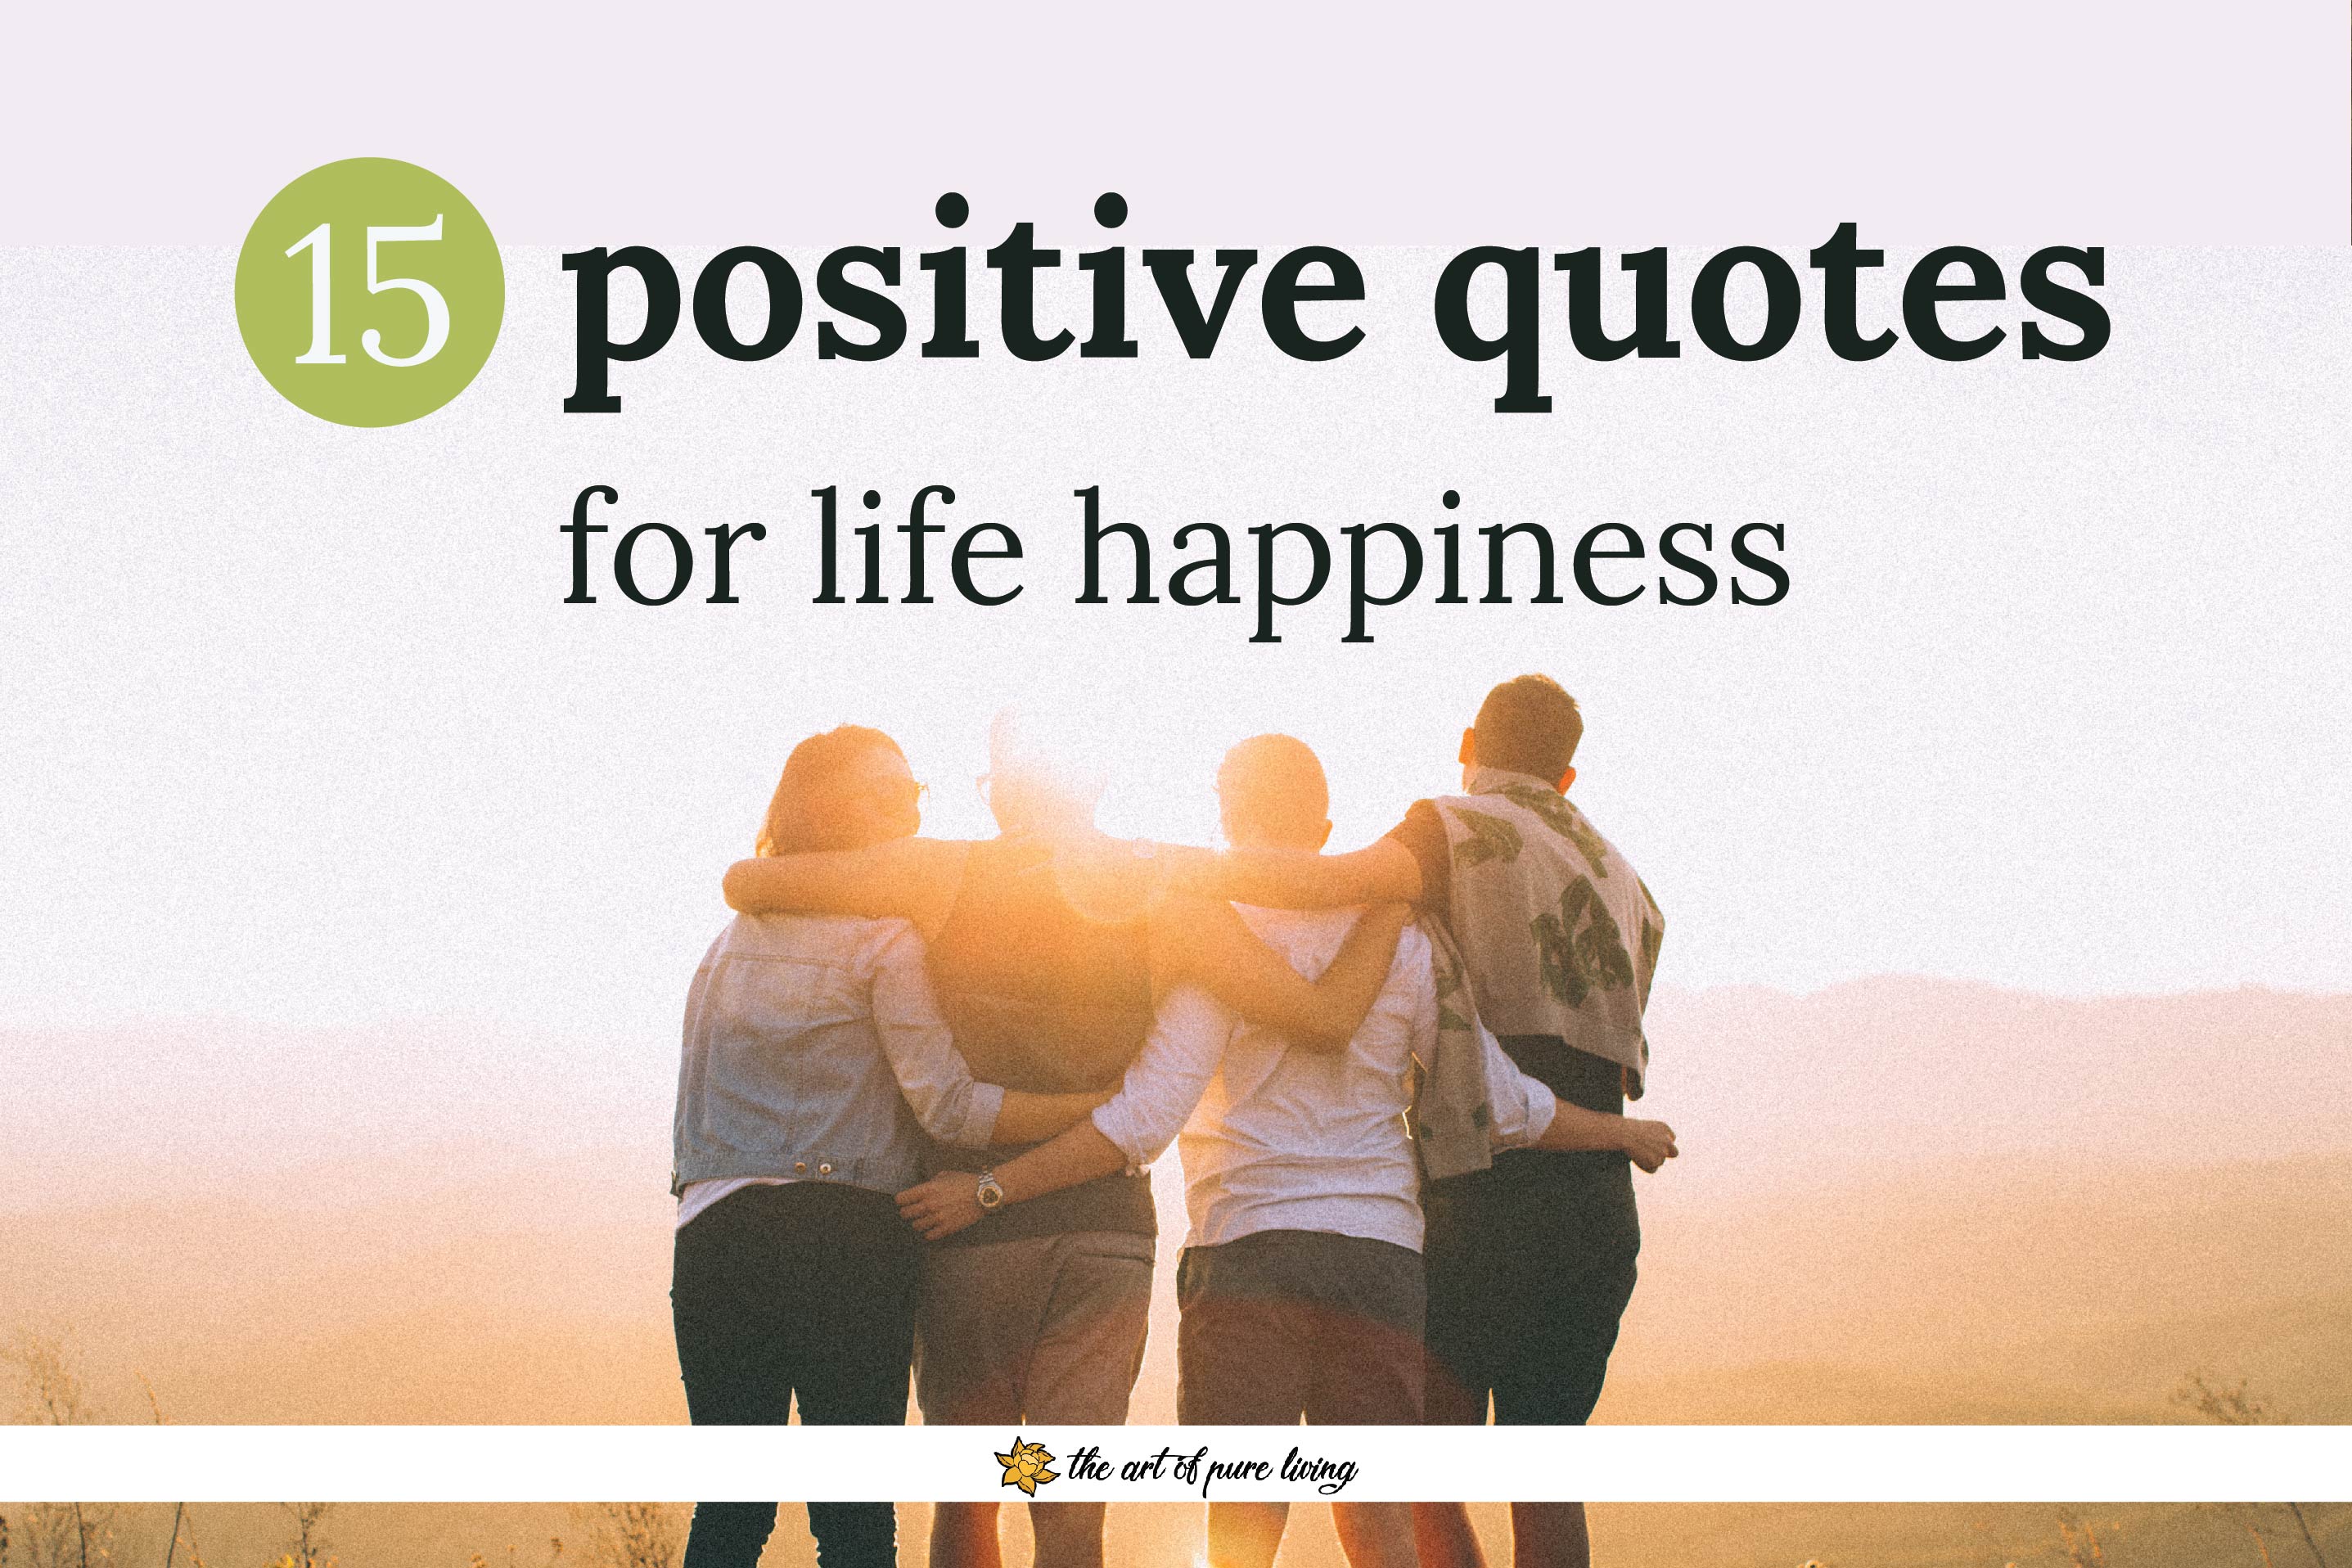 Inspirational Quotes About Life And Happiness - Best Quotes